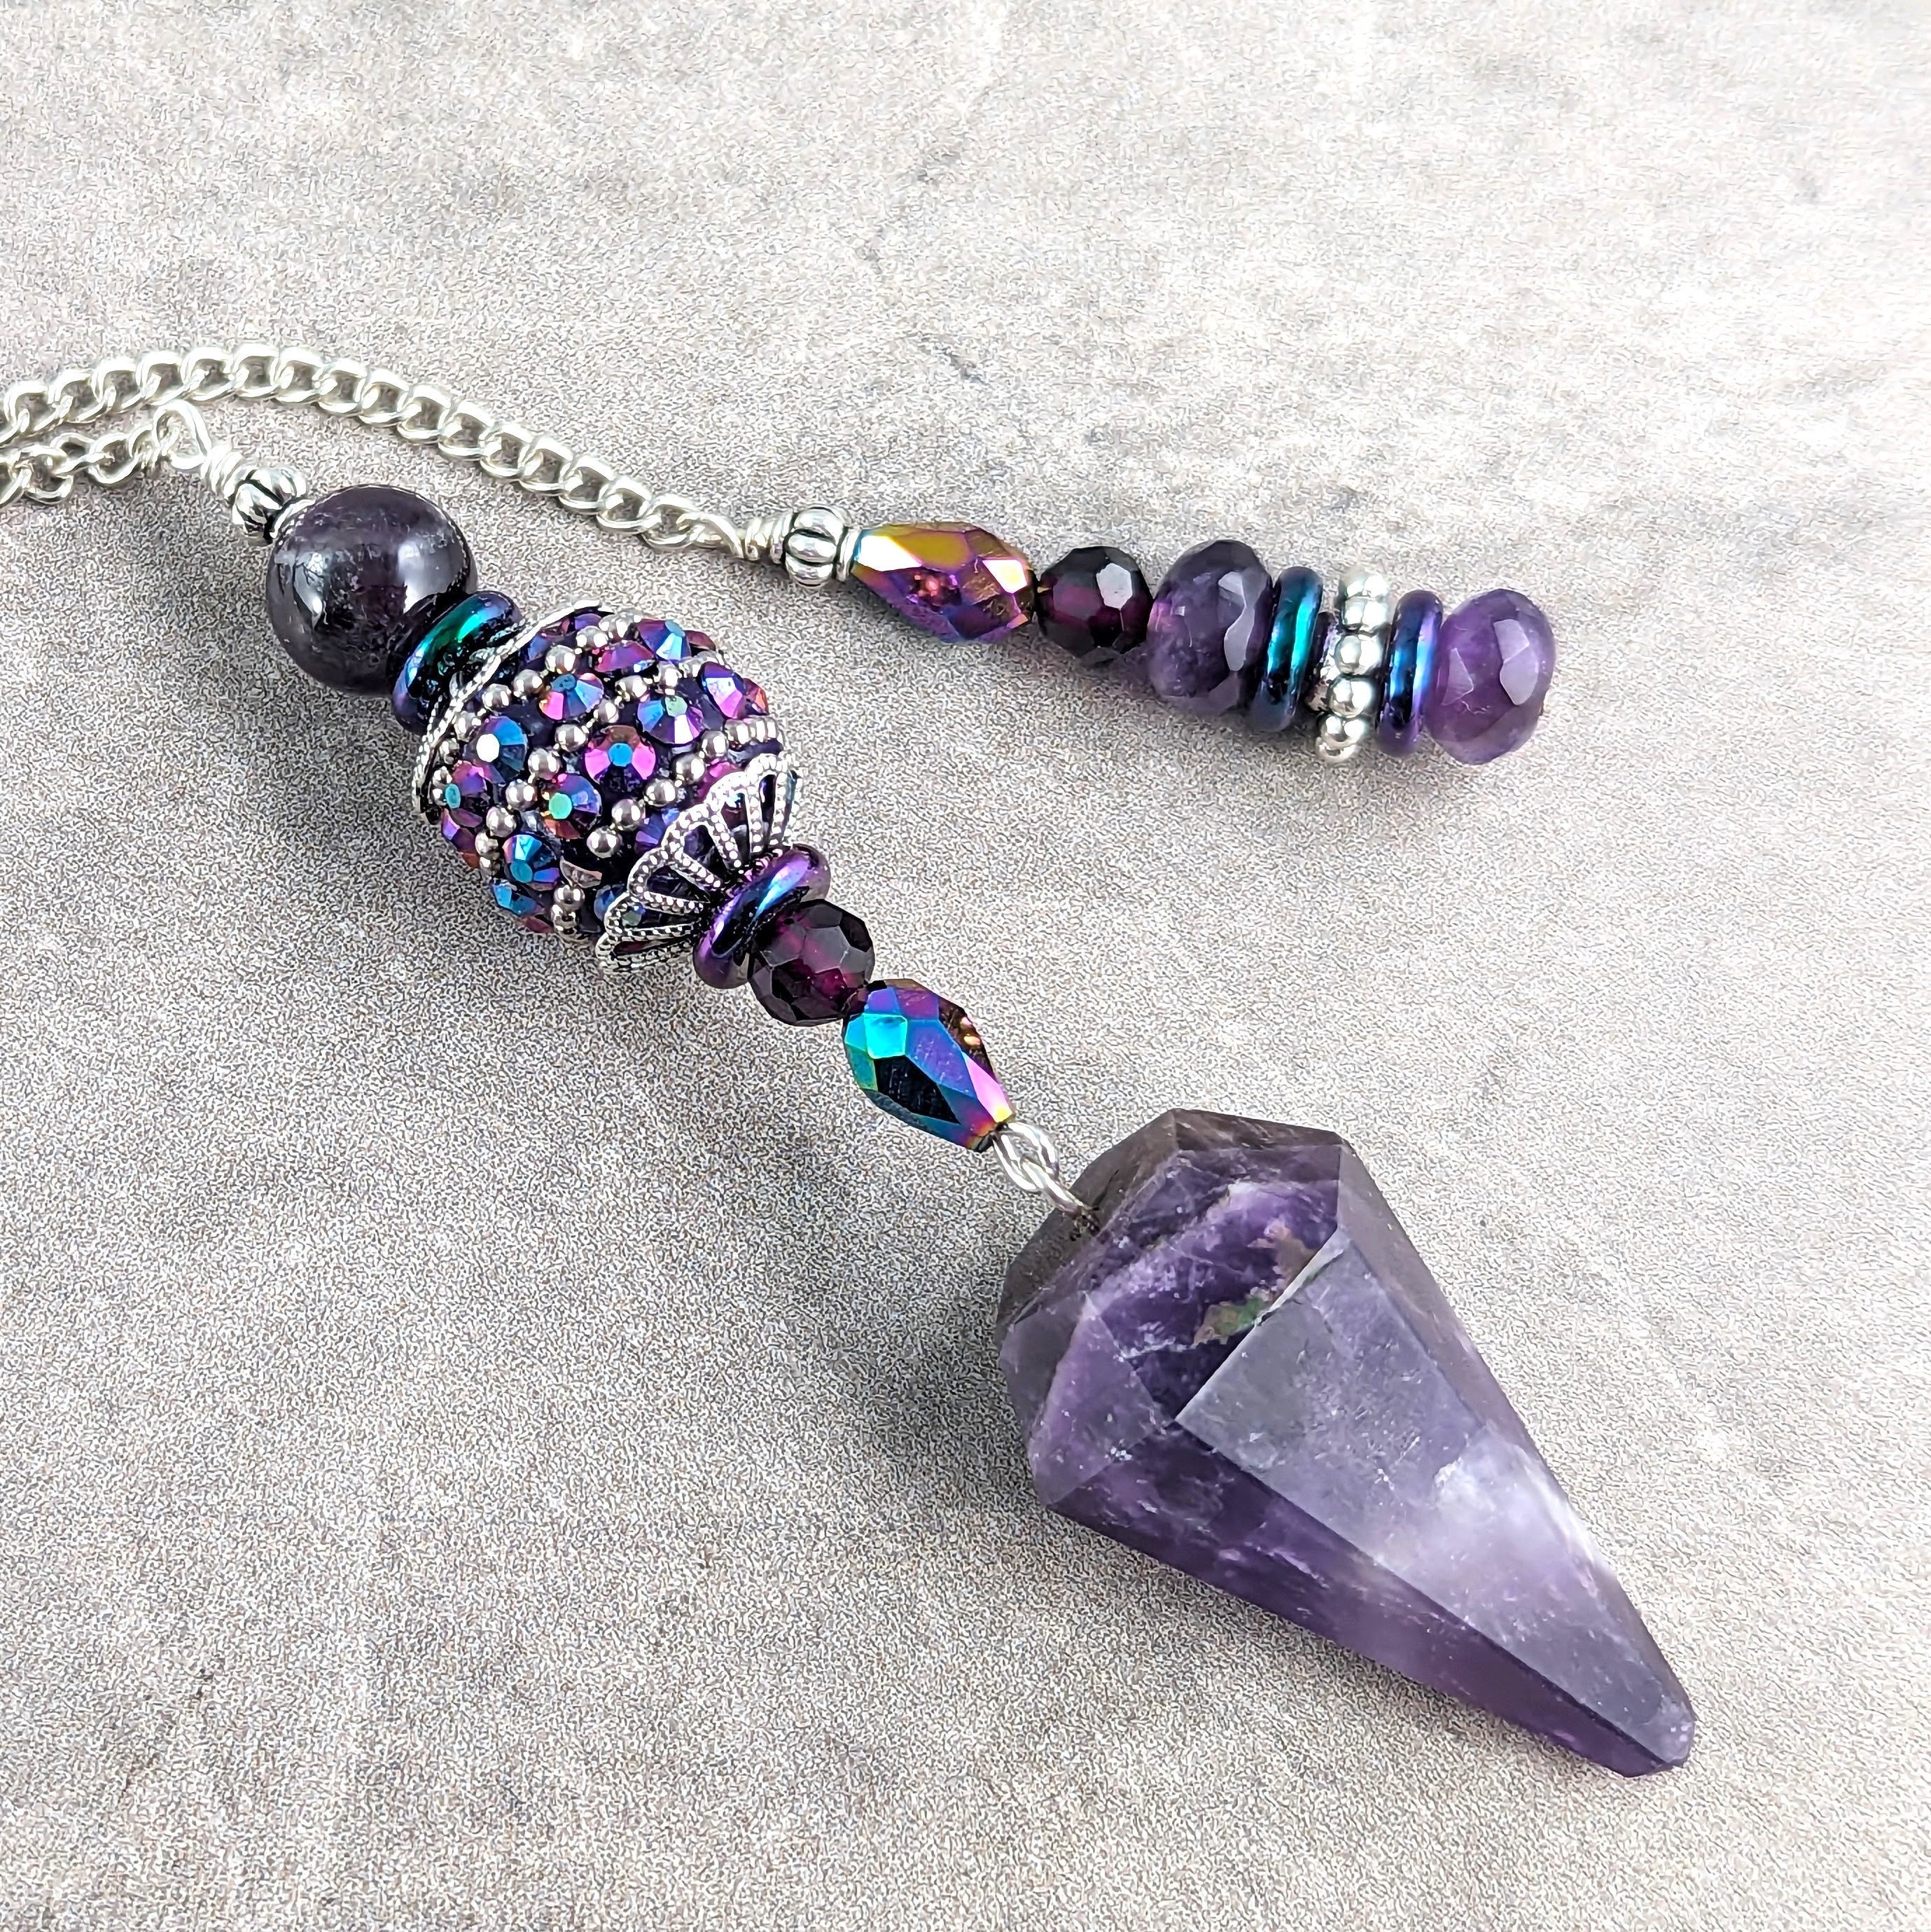 Pendulum Necklace String Knotted with Amethyst - Moon Dance Charms